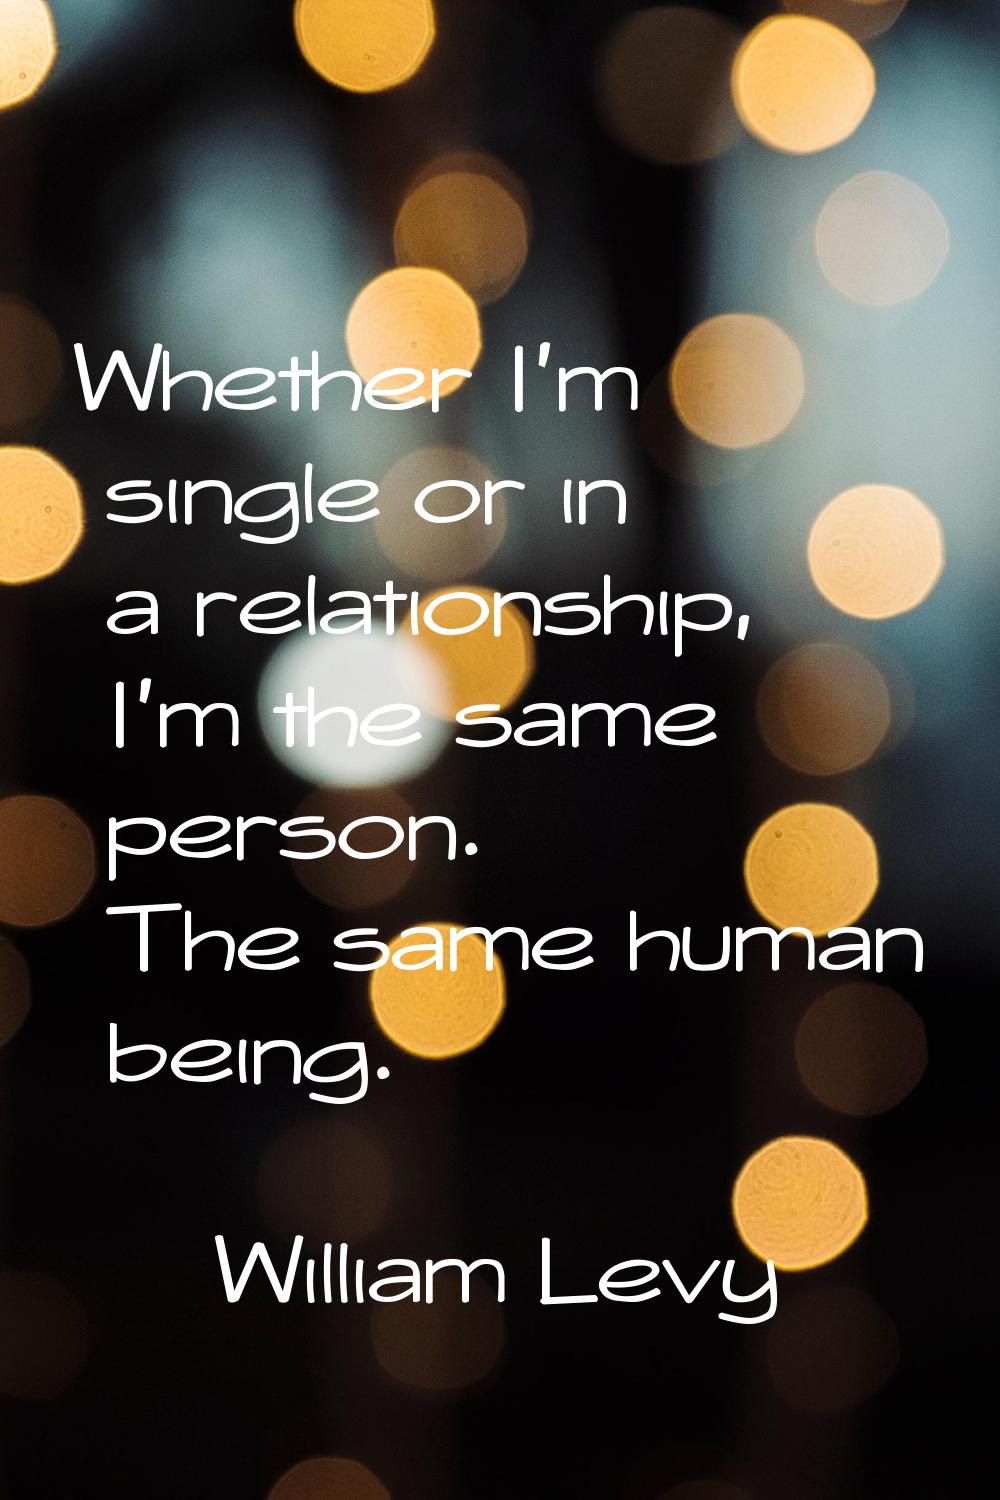 Whether I'm single or in a relationship, I'm the same person. The same human being.